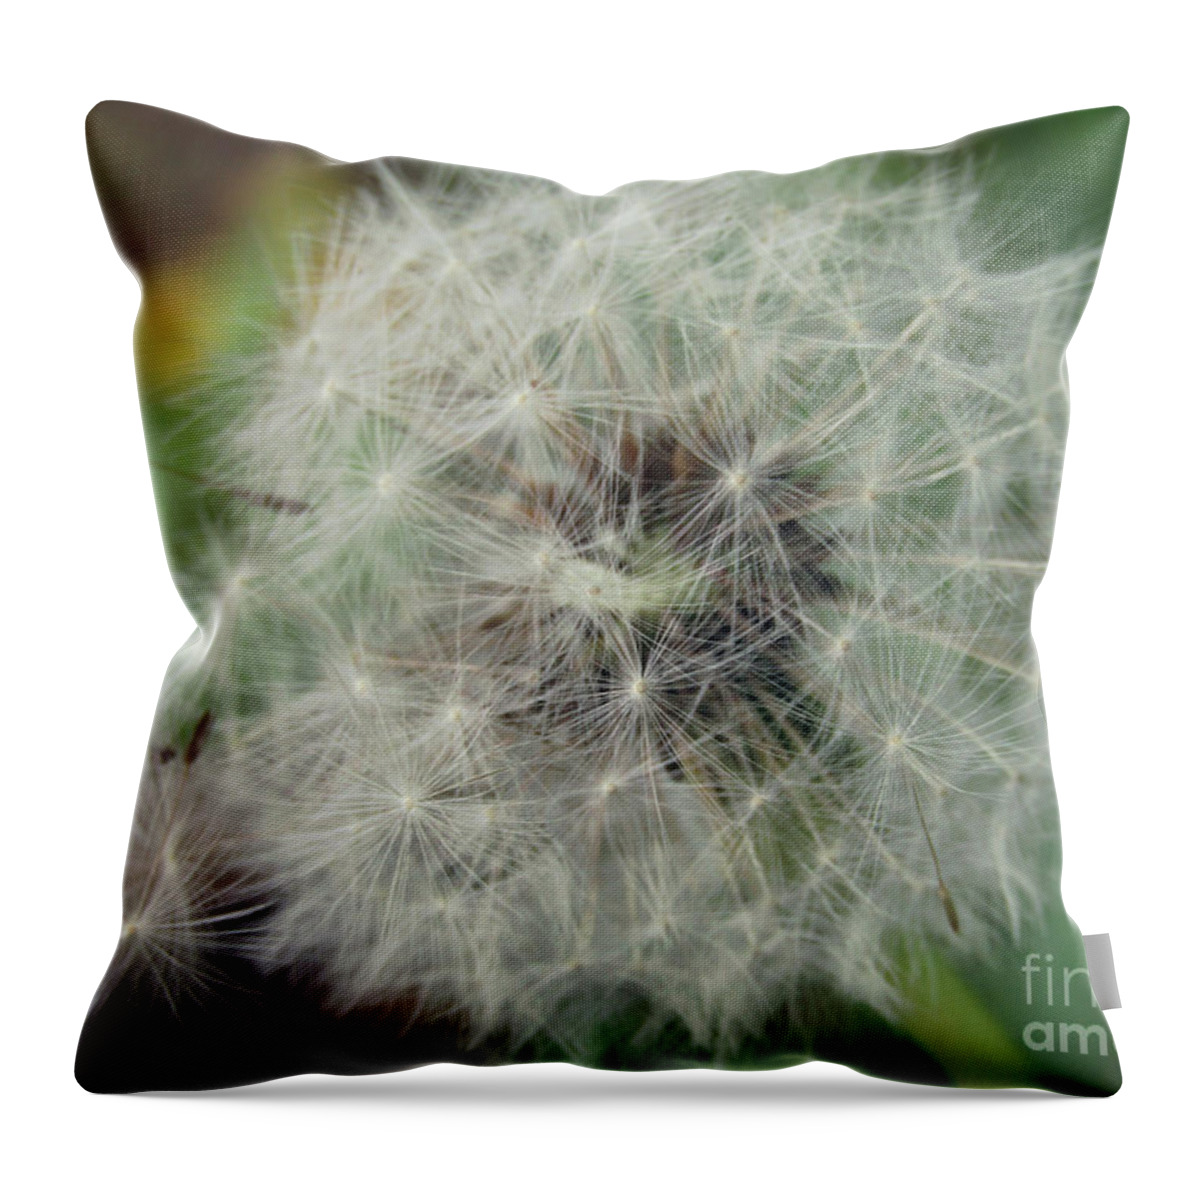 Dandelion Throw Pillow featuring the photograph Day Moon by Kim Tran